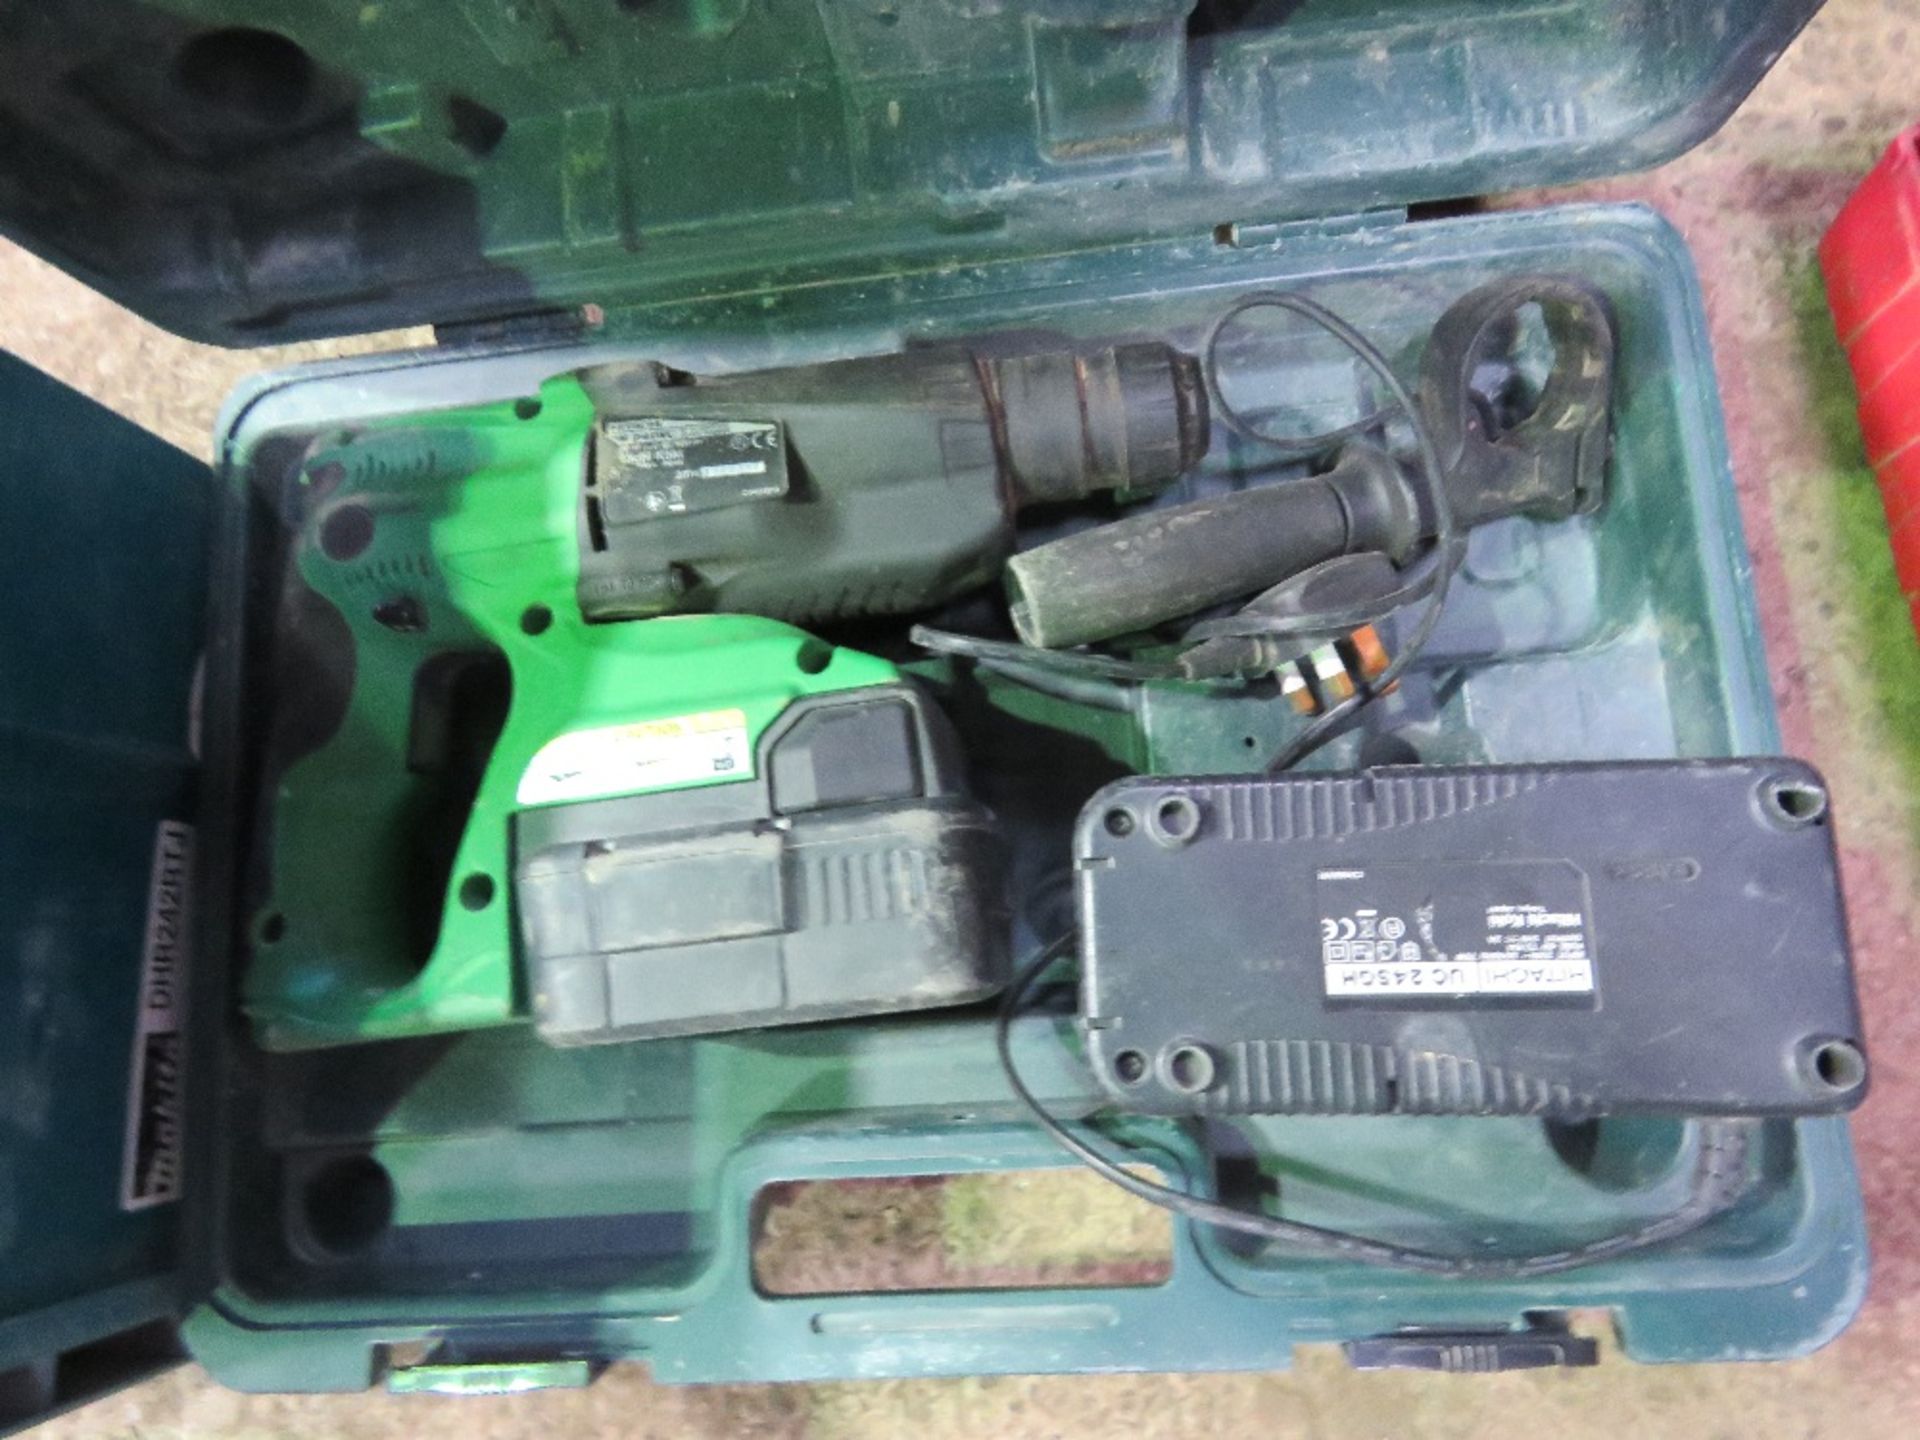 HITACHI 24V BATTERY DRILL SOURCED FROM LARGE CONSTRUCTION COMPANY LIQUIDATION.